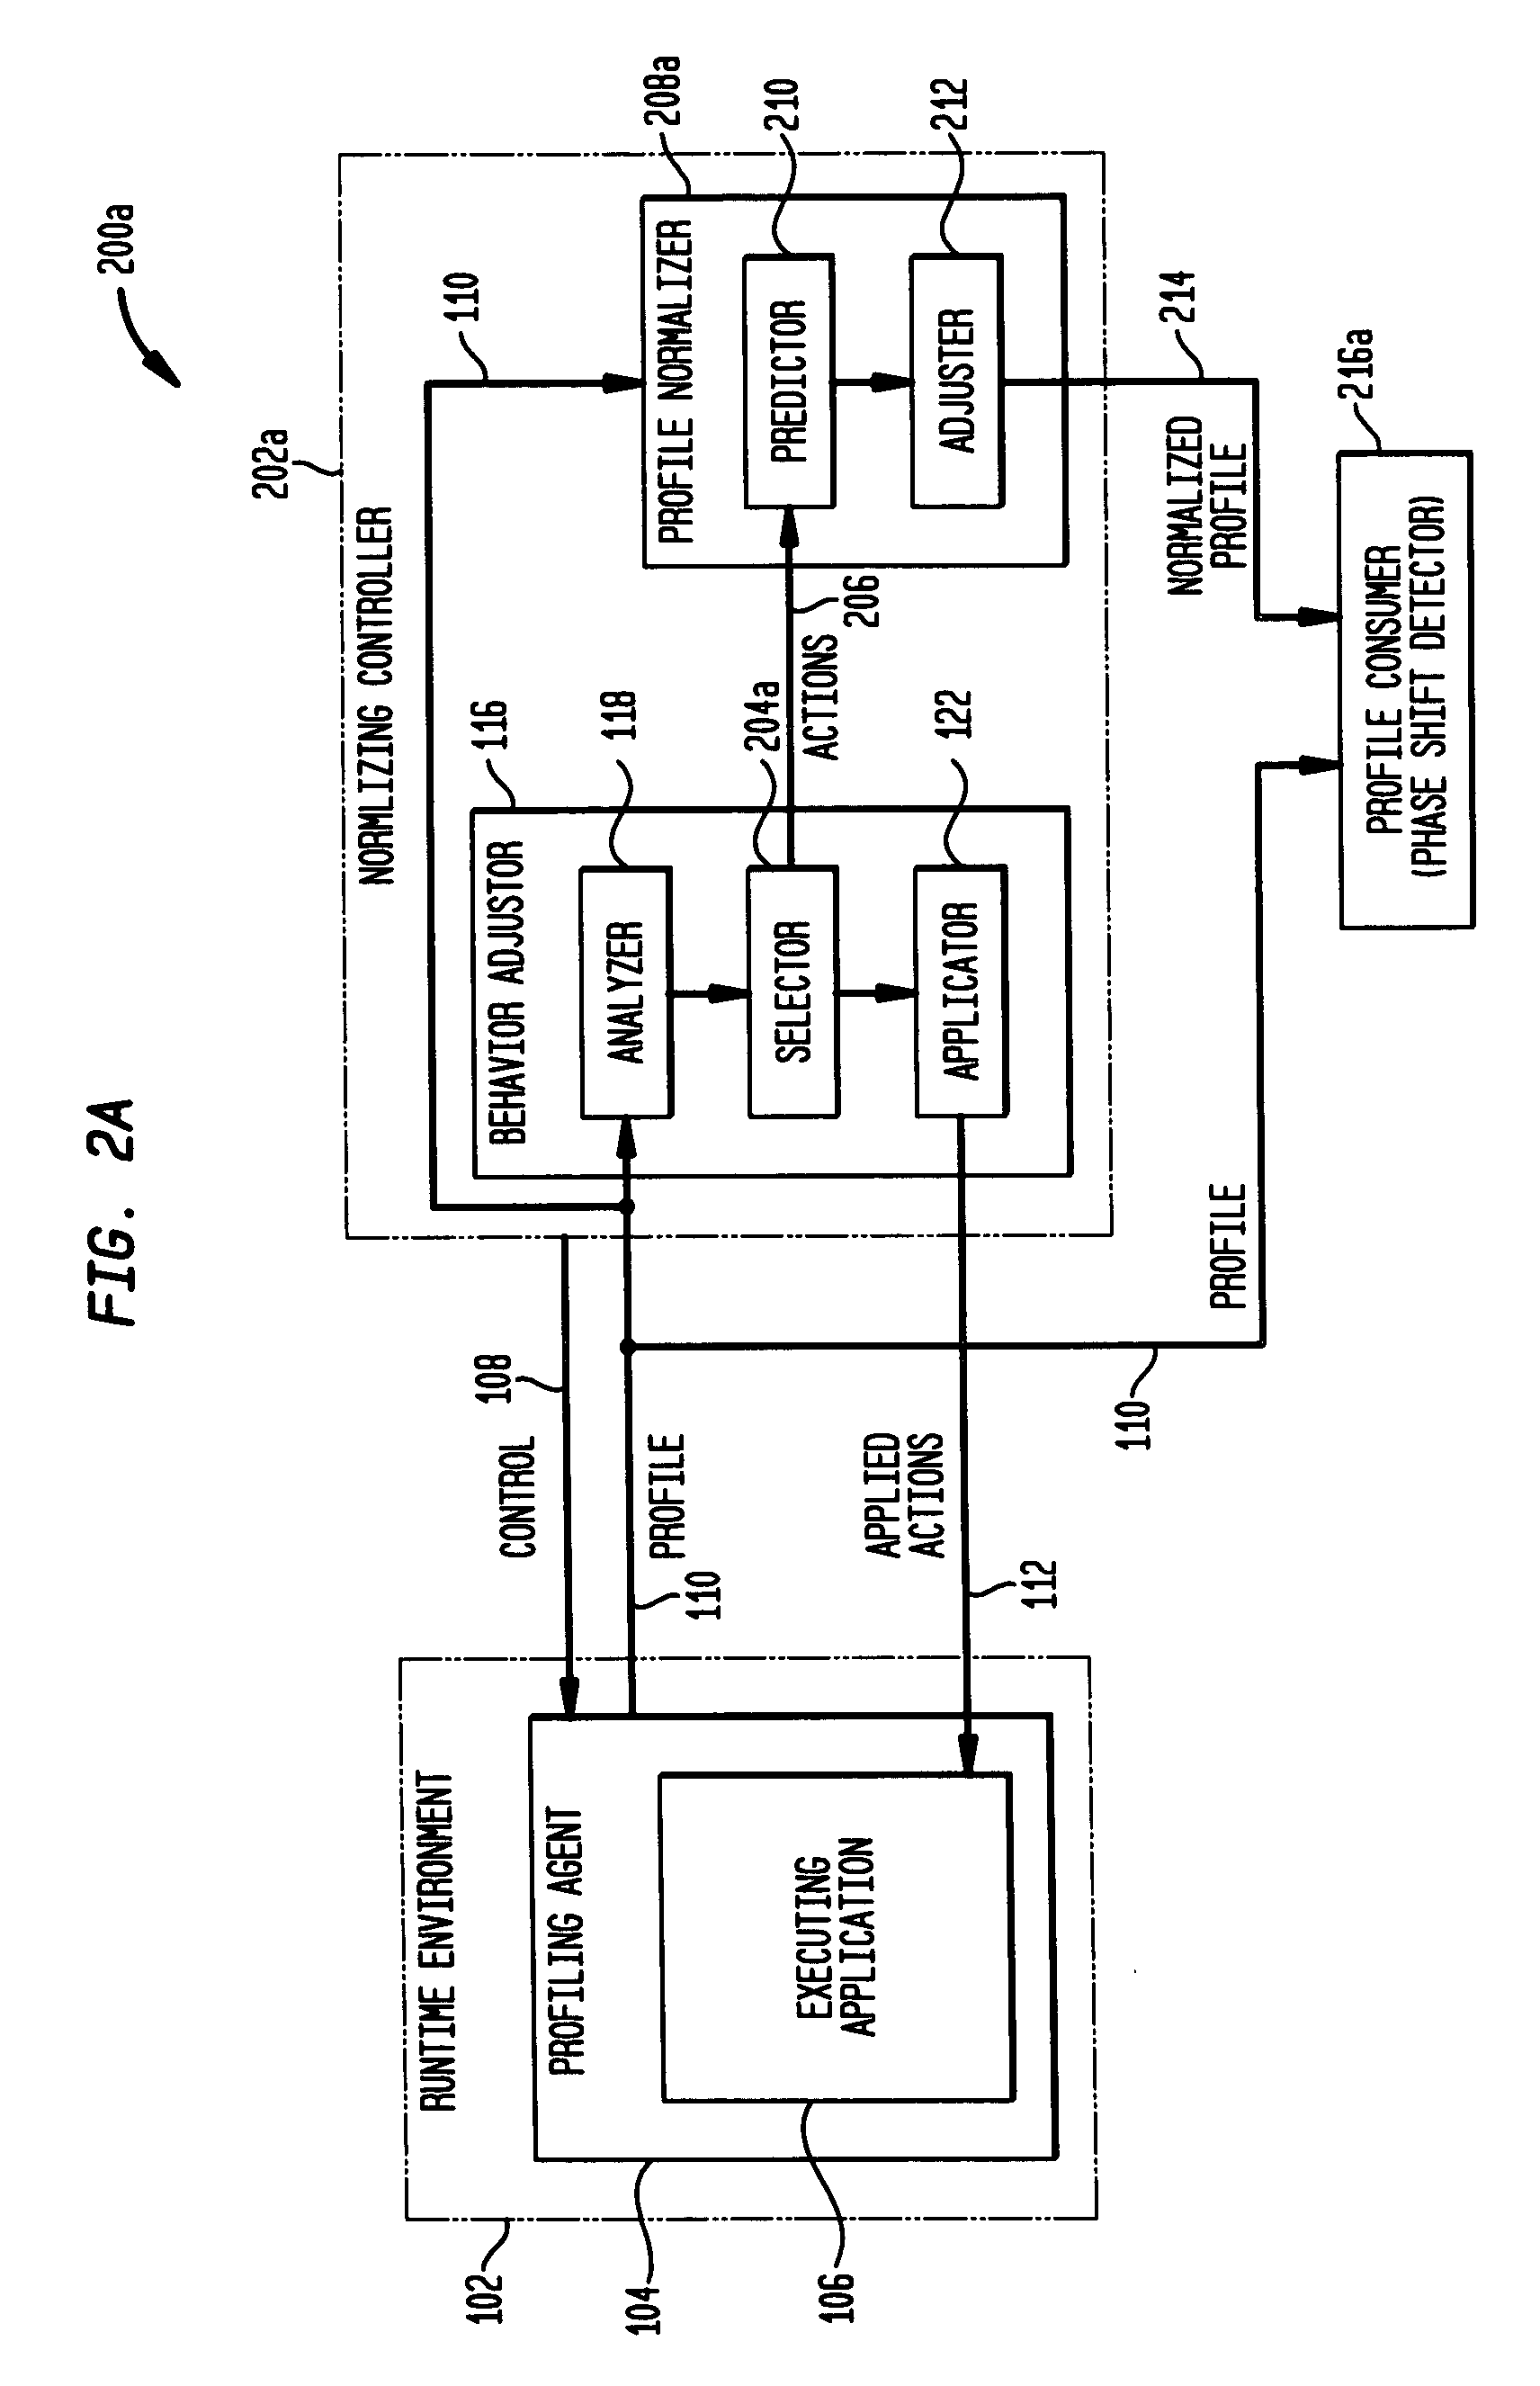 Profile normalization in an autonomic software system